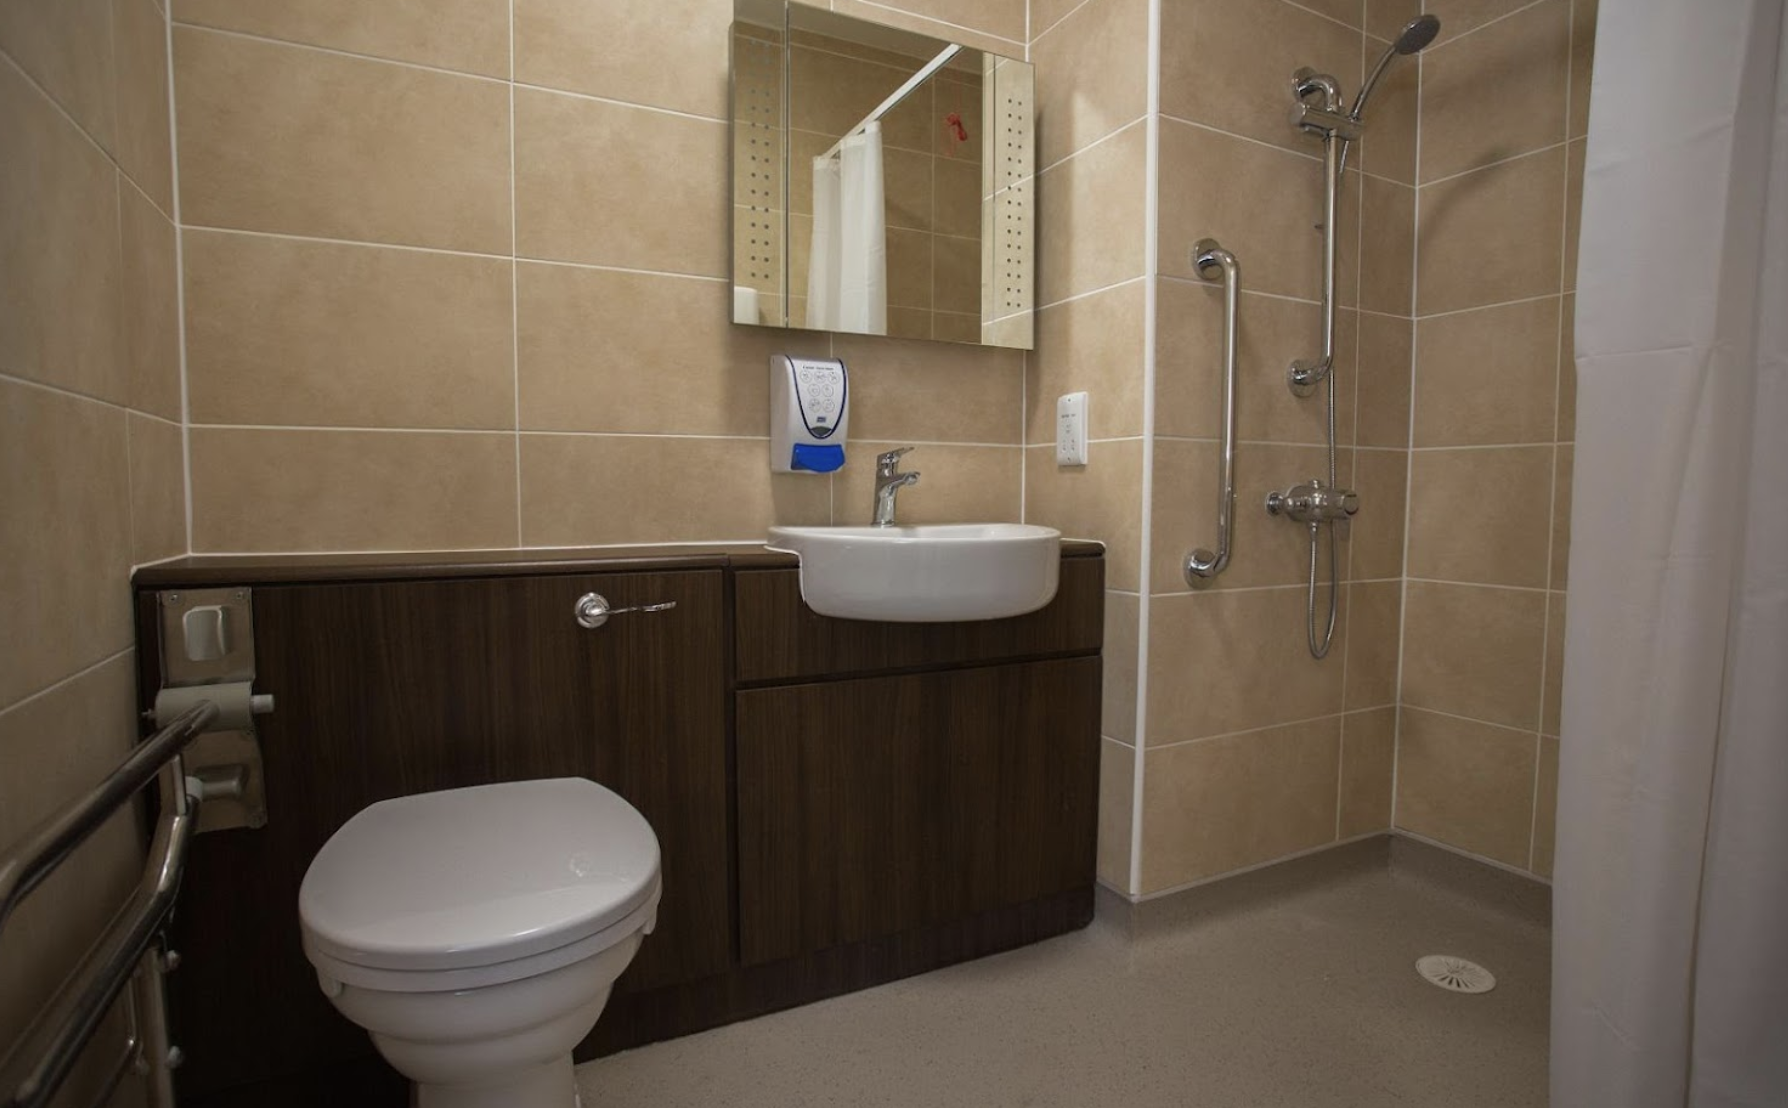 Bathroom of Ardenlea Grove care home in Solihull, West Midlands